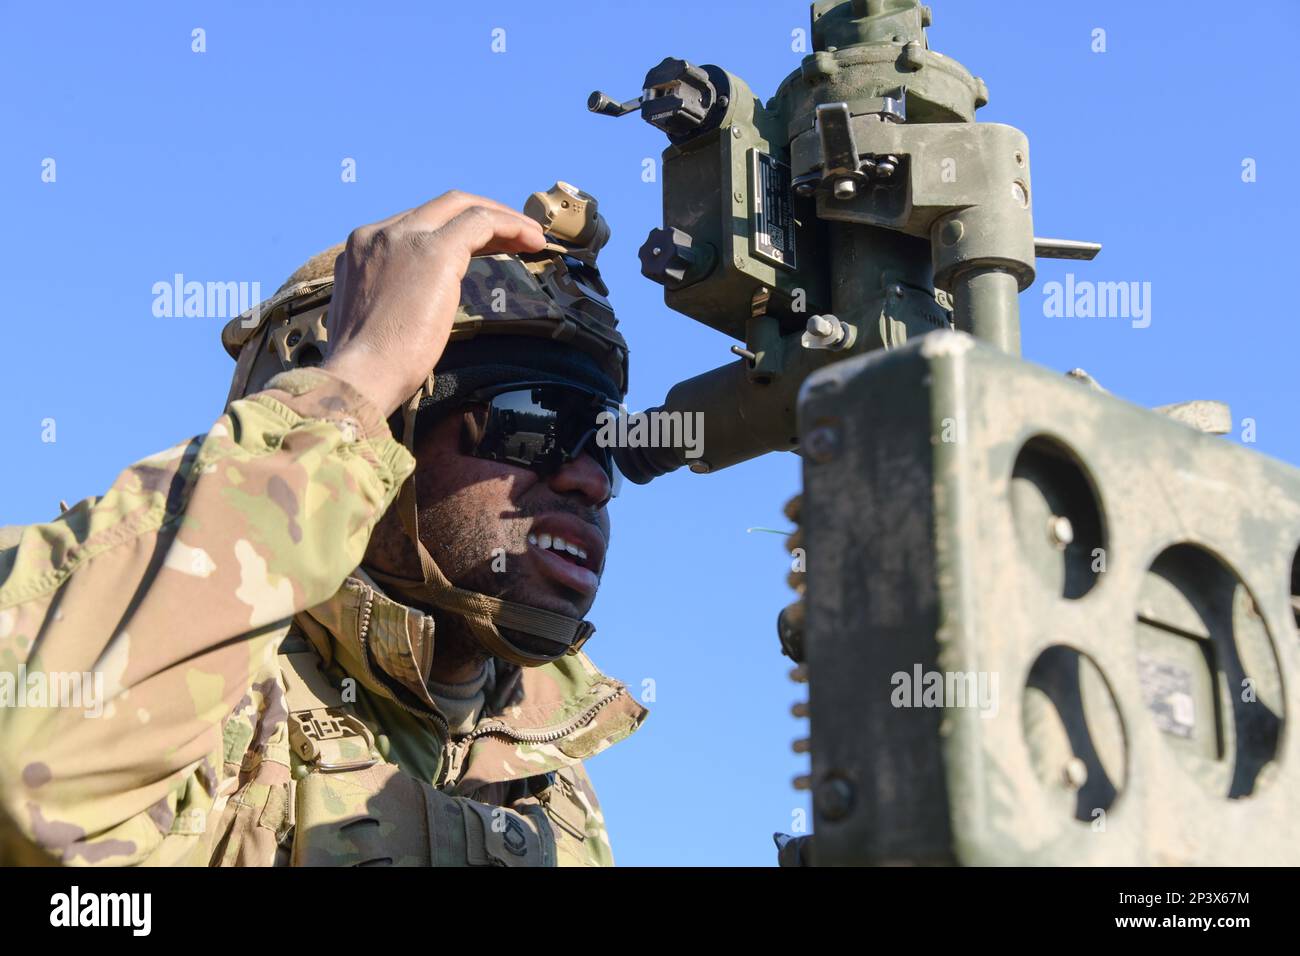 A U.S. Soldier assigned to Field Artillery Squadron, 2nd Cavalry Regiment aligns a M777 155mm howitzer to a targets coordinates during Table XVIII certifications as part of Dragoon Ready 23 exercise at the 7th Army Training Command’s Grafenwoehr Training Area, Germany, February 9, 2023. Dragoon Ready 23 is designed to ensure readiness and train the regiment in its mission-essential tasks in support of unified land operations to enhance proficiency and improve interoperability with NATO Allies. Stock Photo